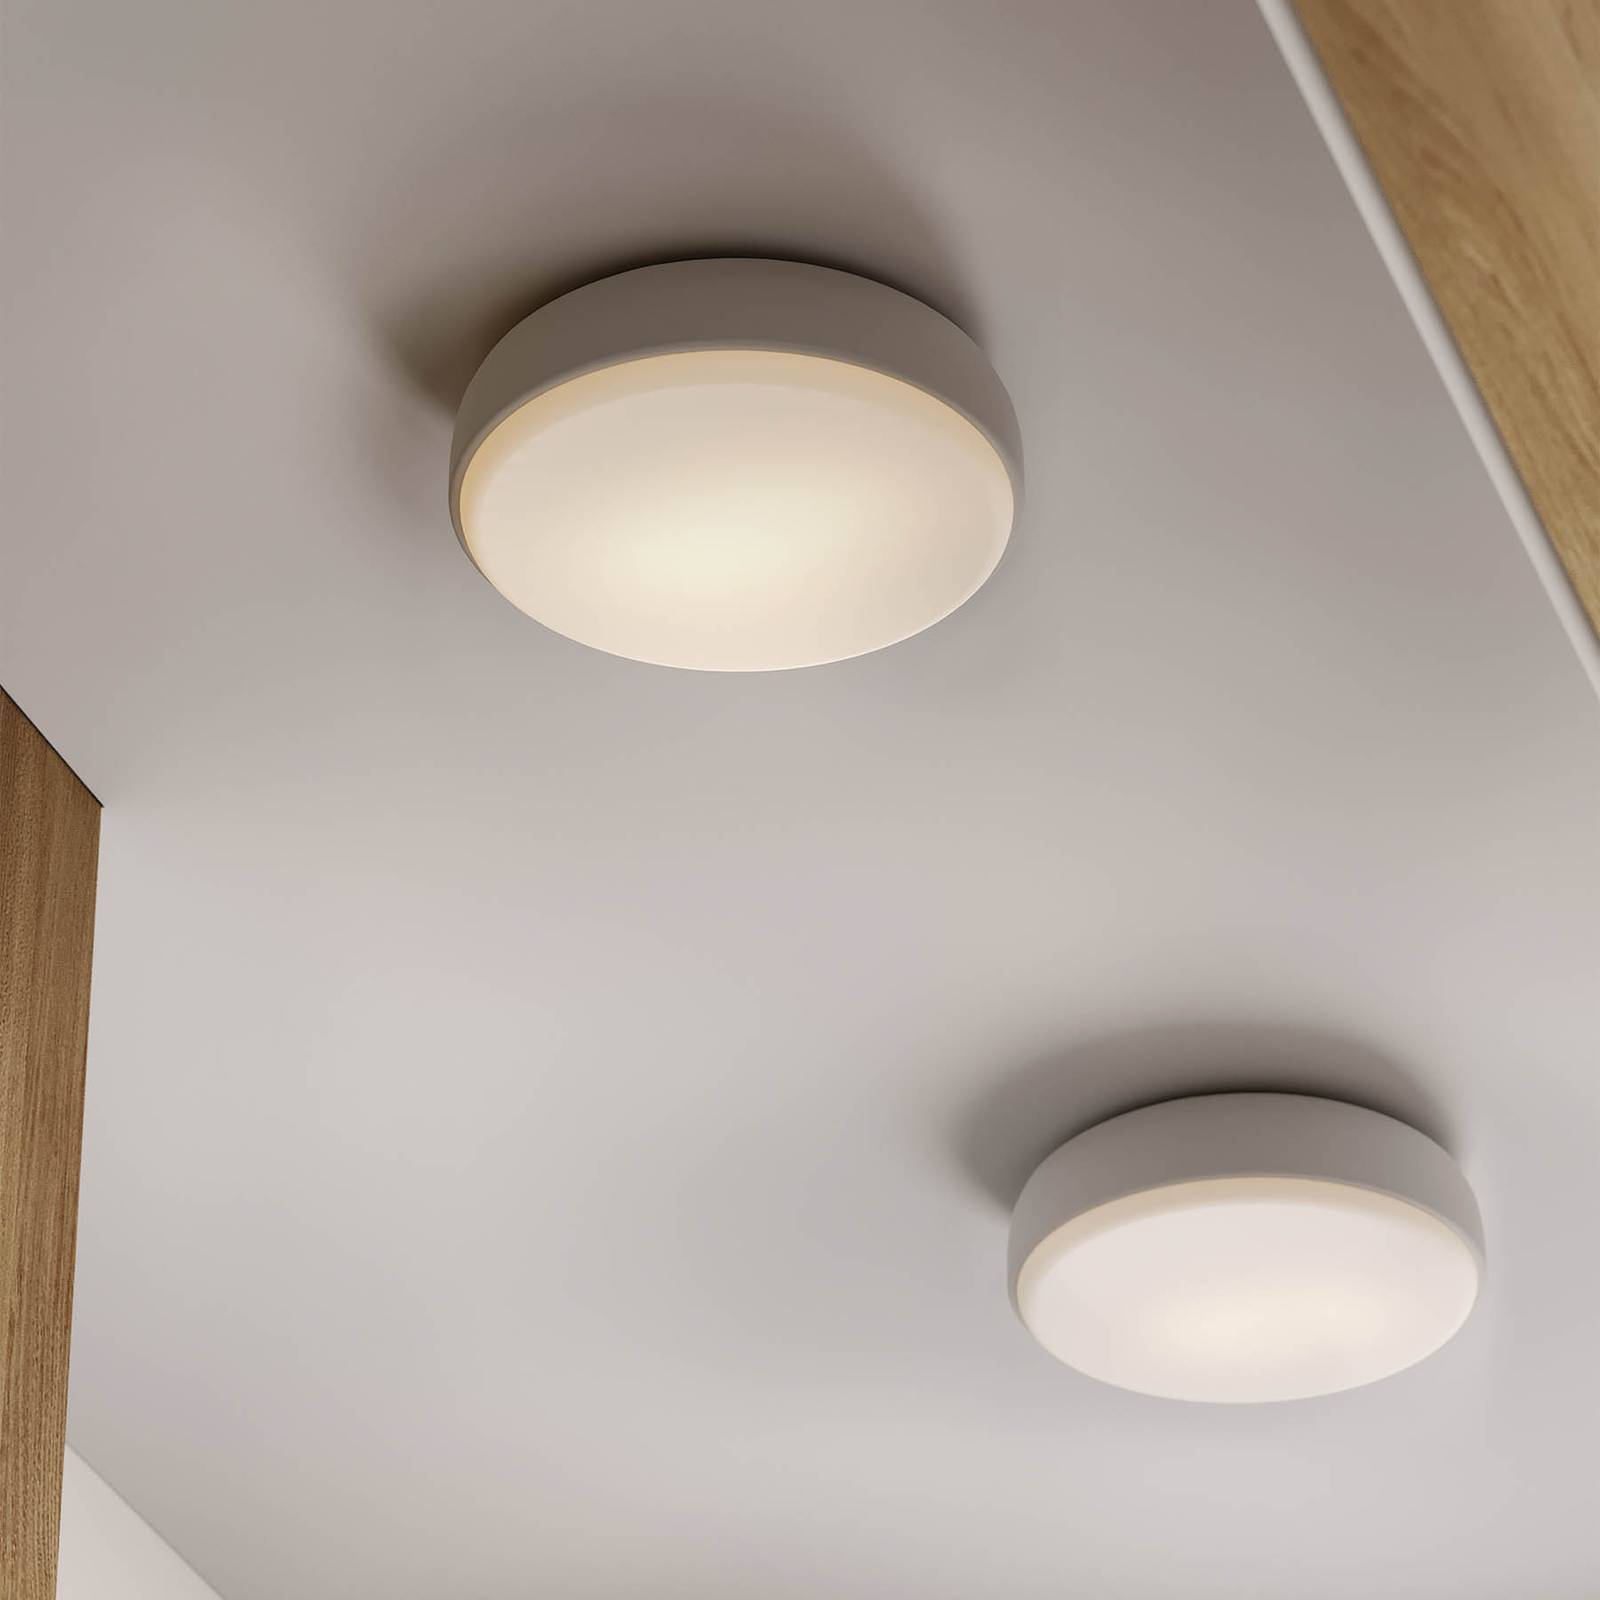 Northern Over Me ceiling light white 50 cm